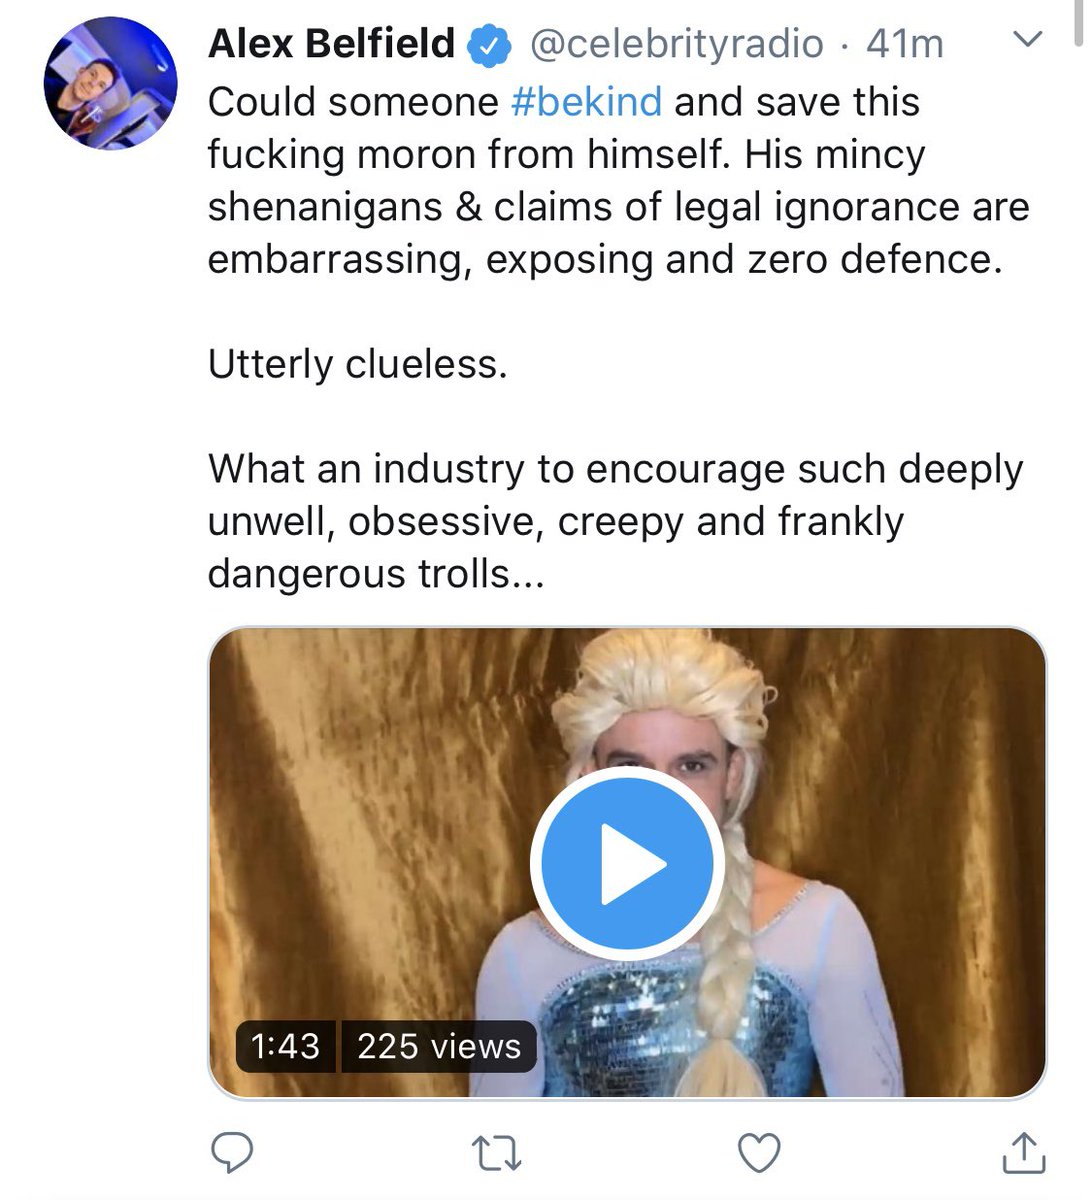 At 9.23 on Monday 13th April. Alex Belfield  @celebrityradio tweeted this. Calling me a “fucking moron” and “mincy” again.